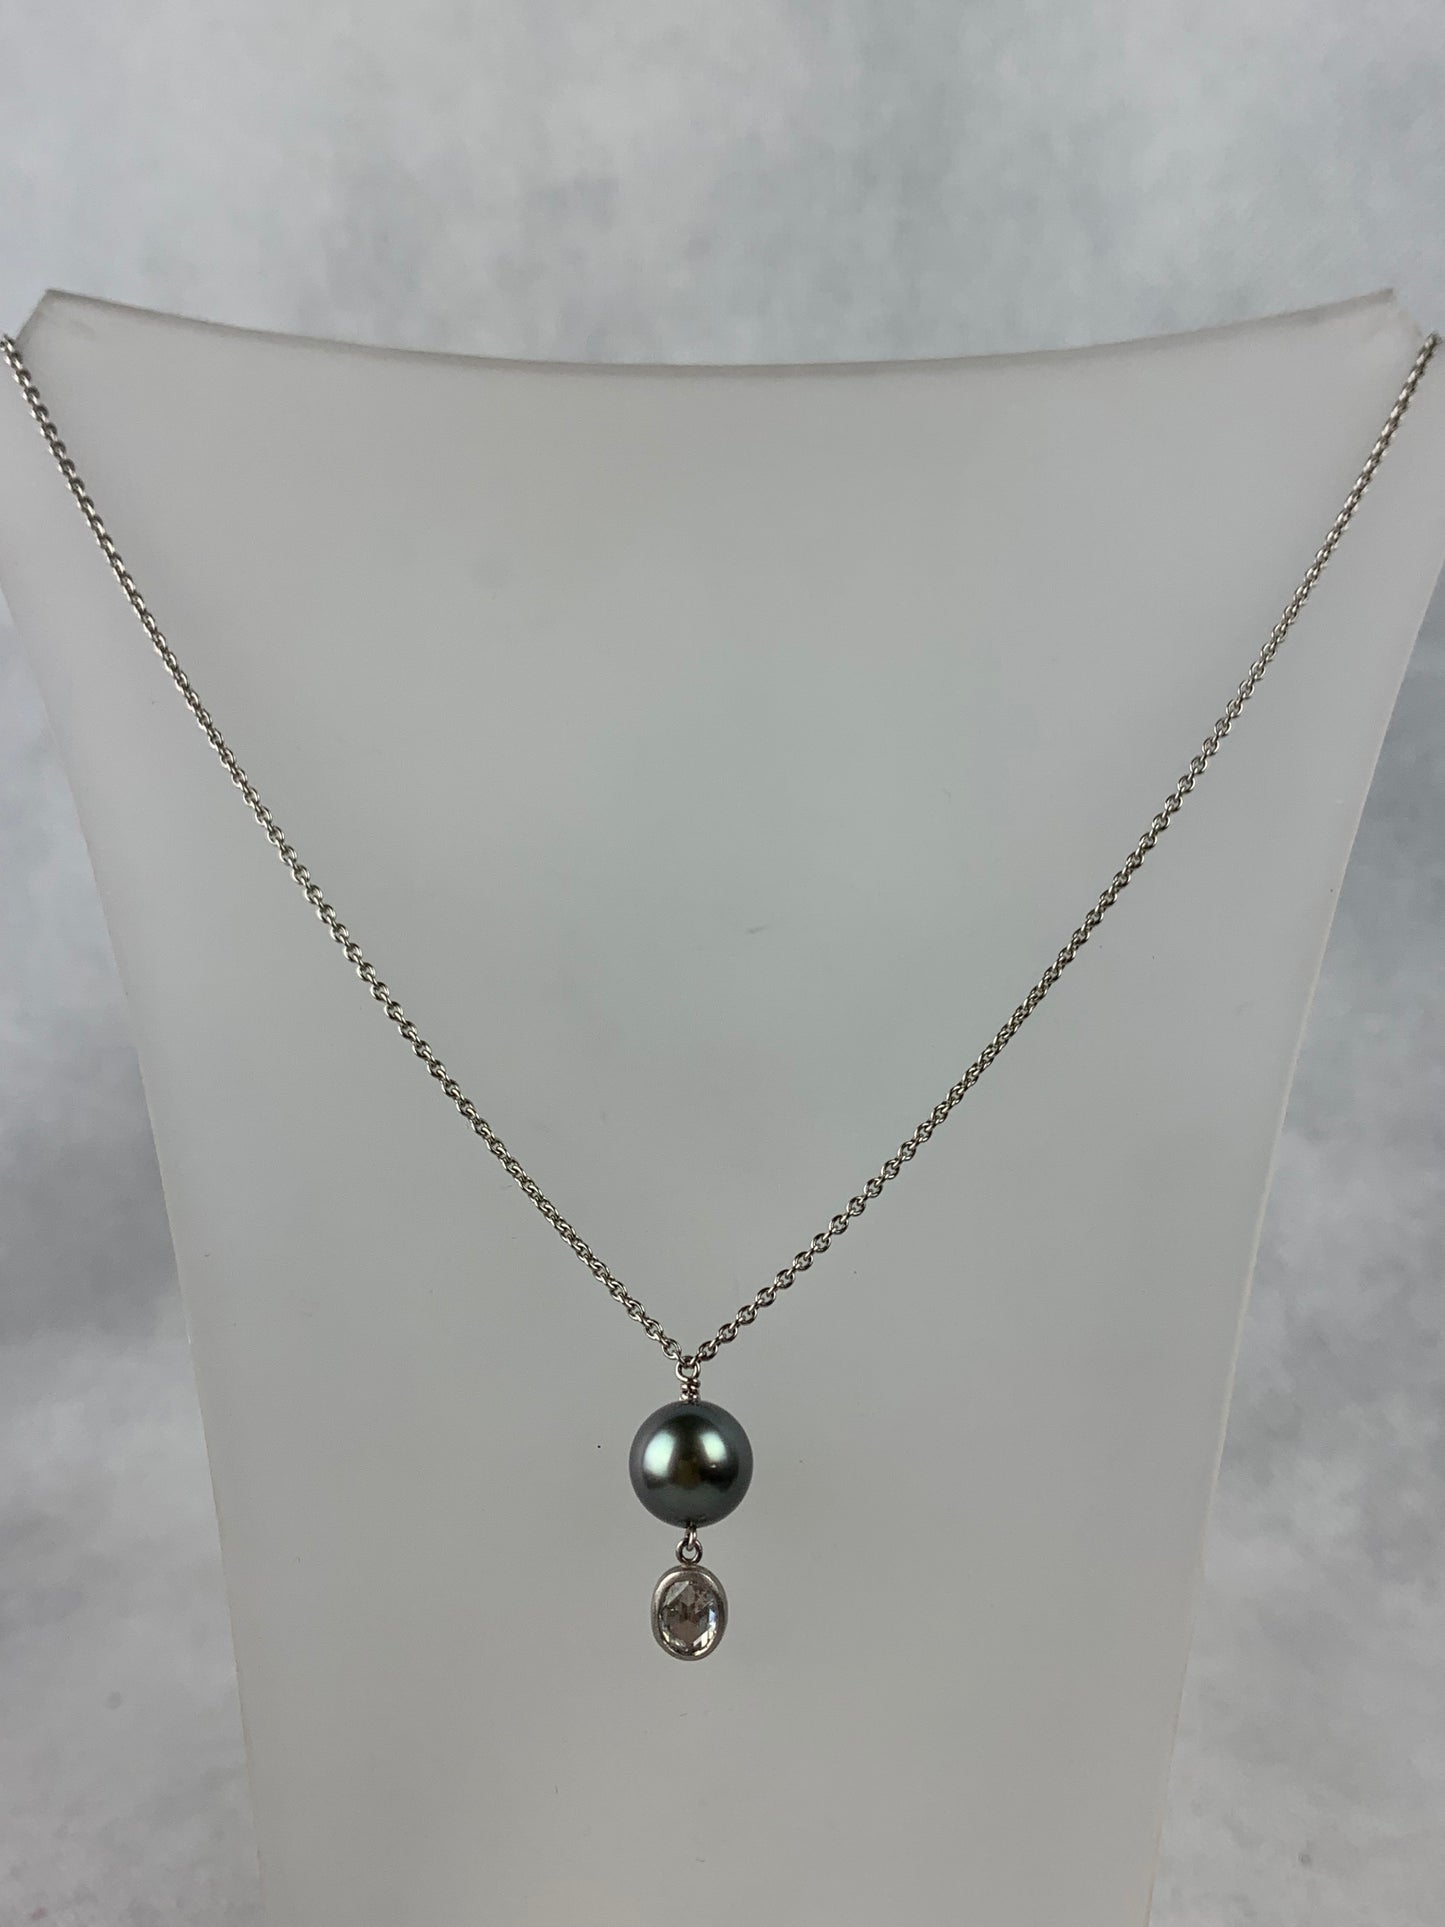 Betts, Malcolm - Platinum Necklace with Tahitian Pearl and Diamond